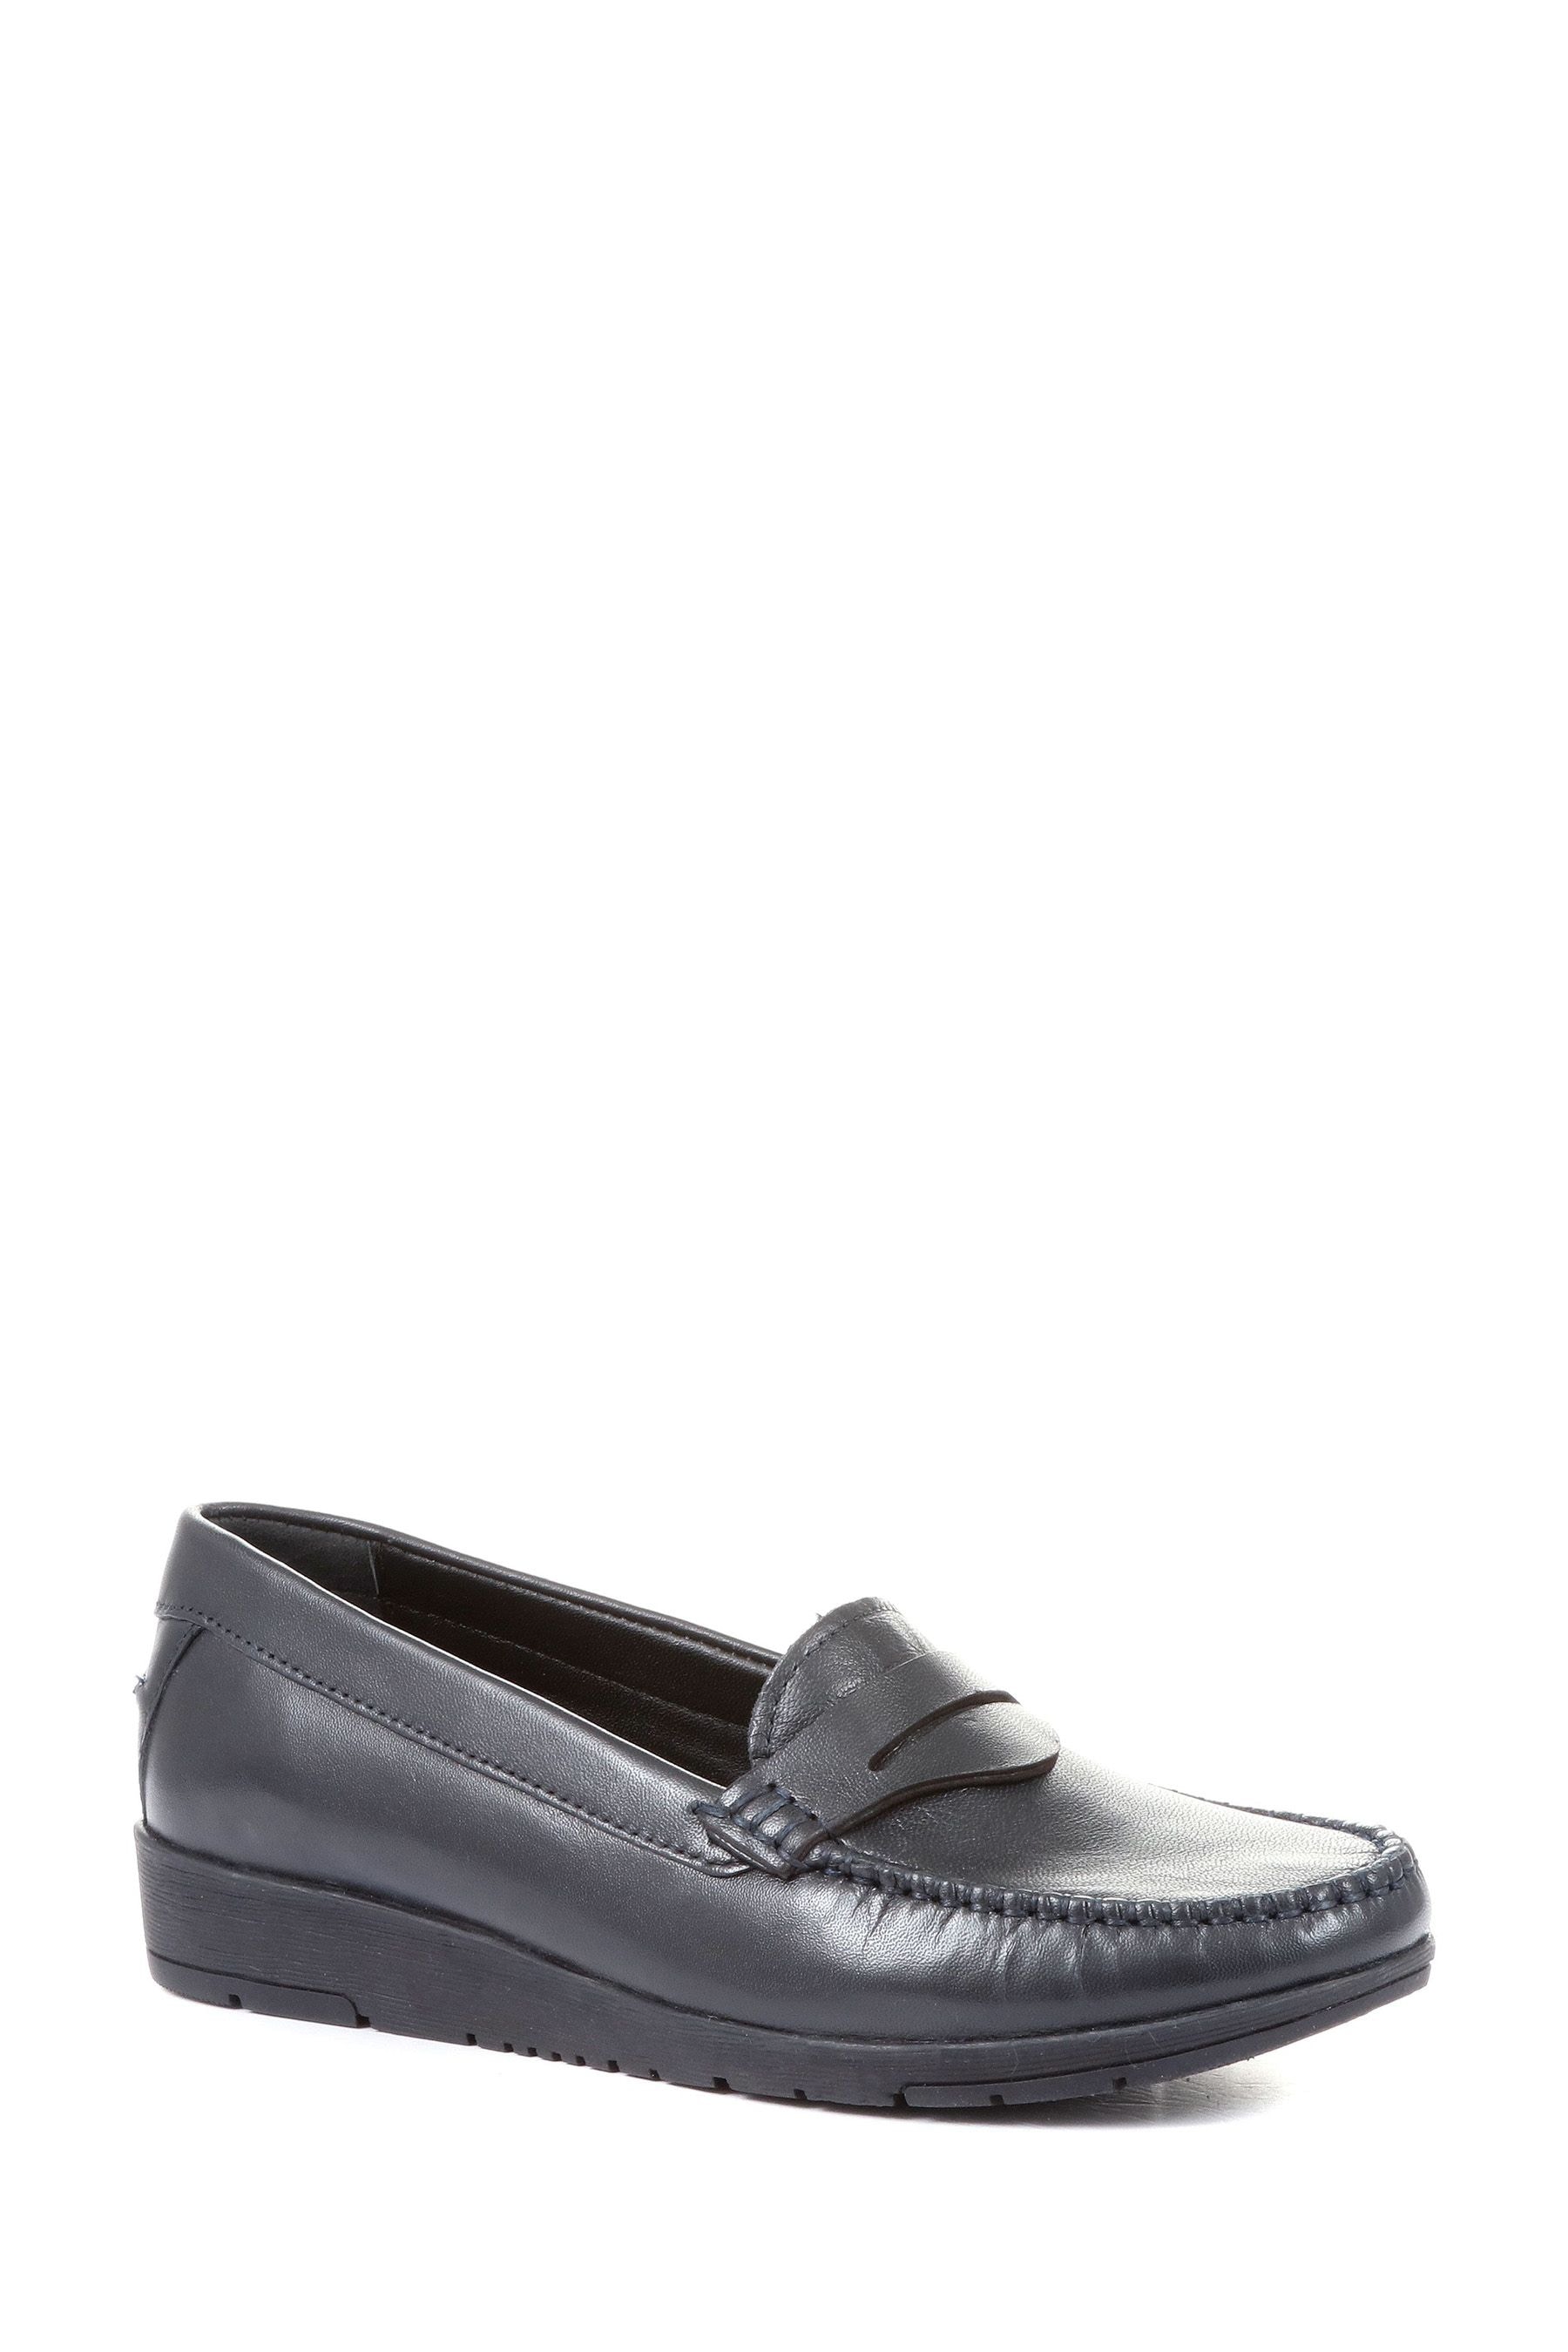 Buy Pavers Blue Wide Fit Leather Penny Loafers from the Next UK online shop